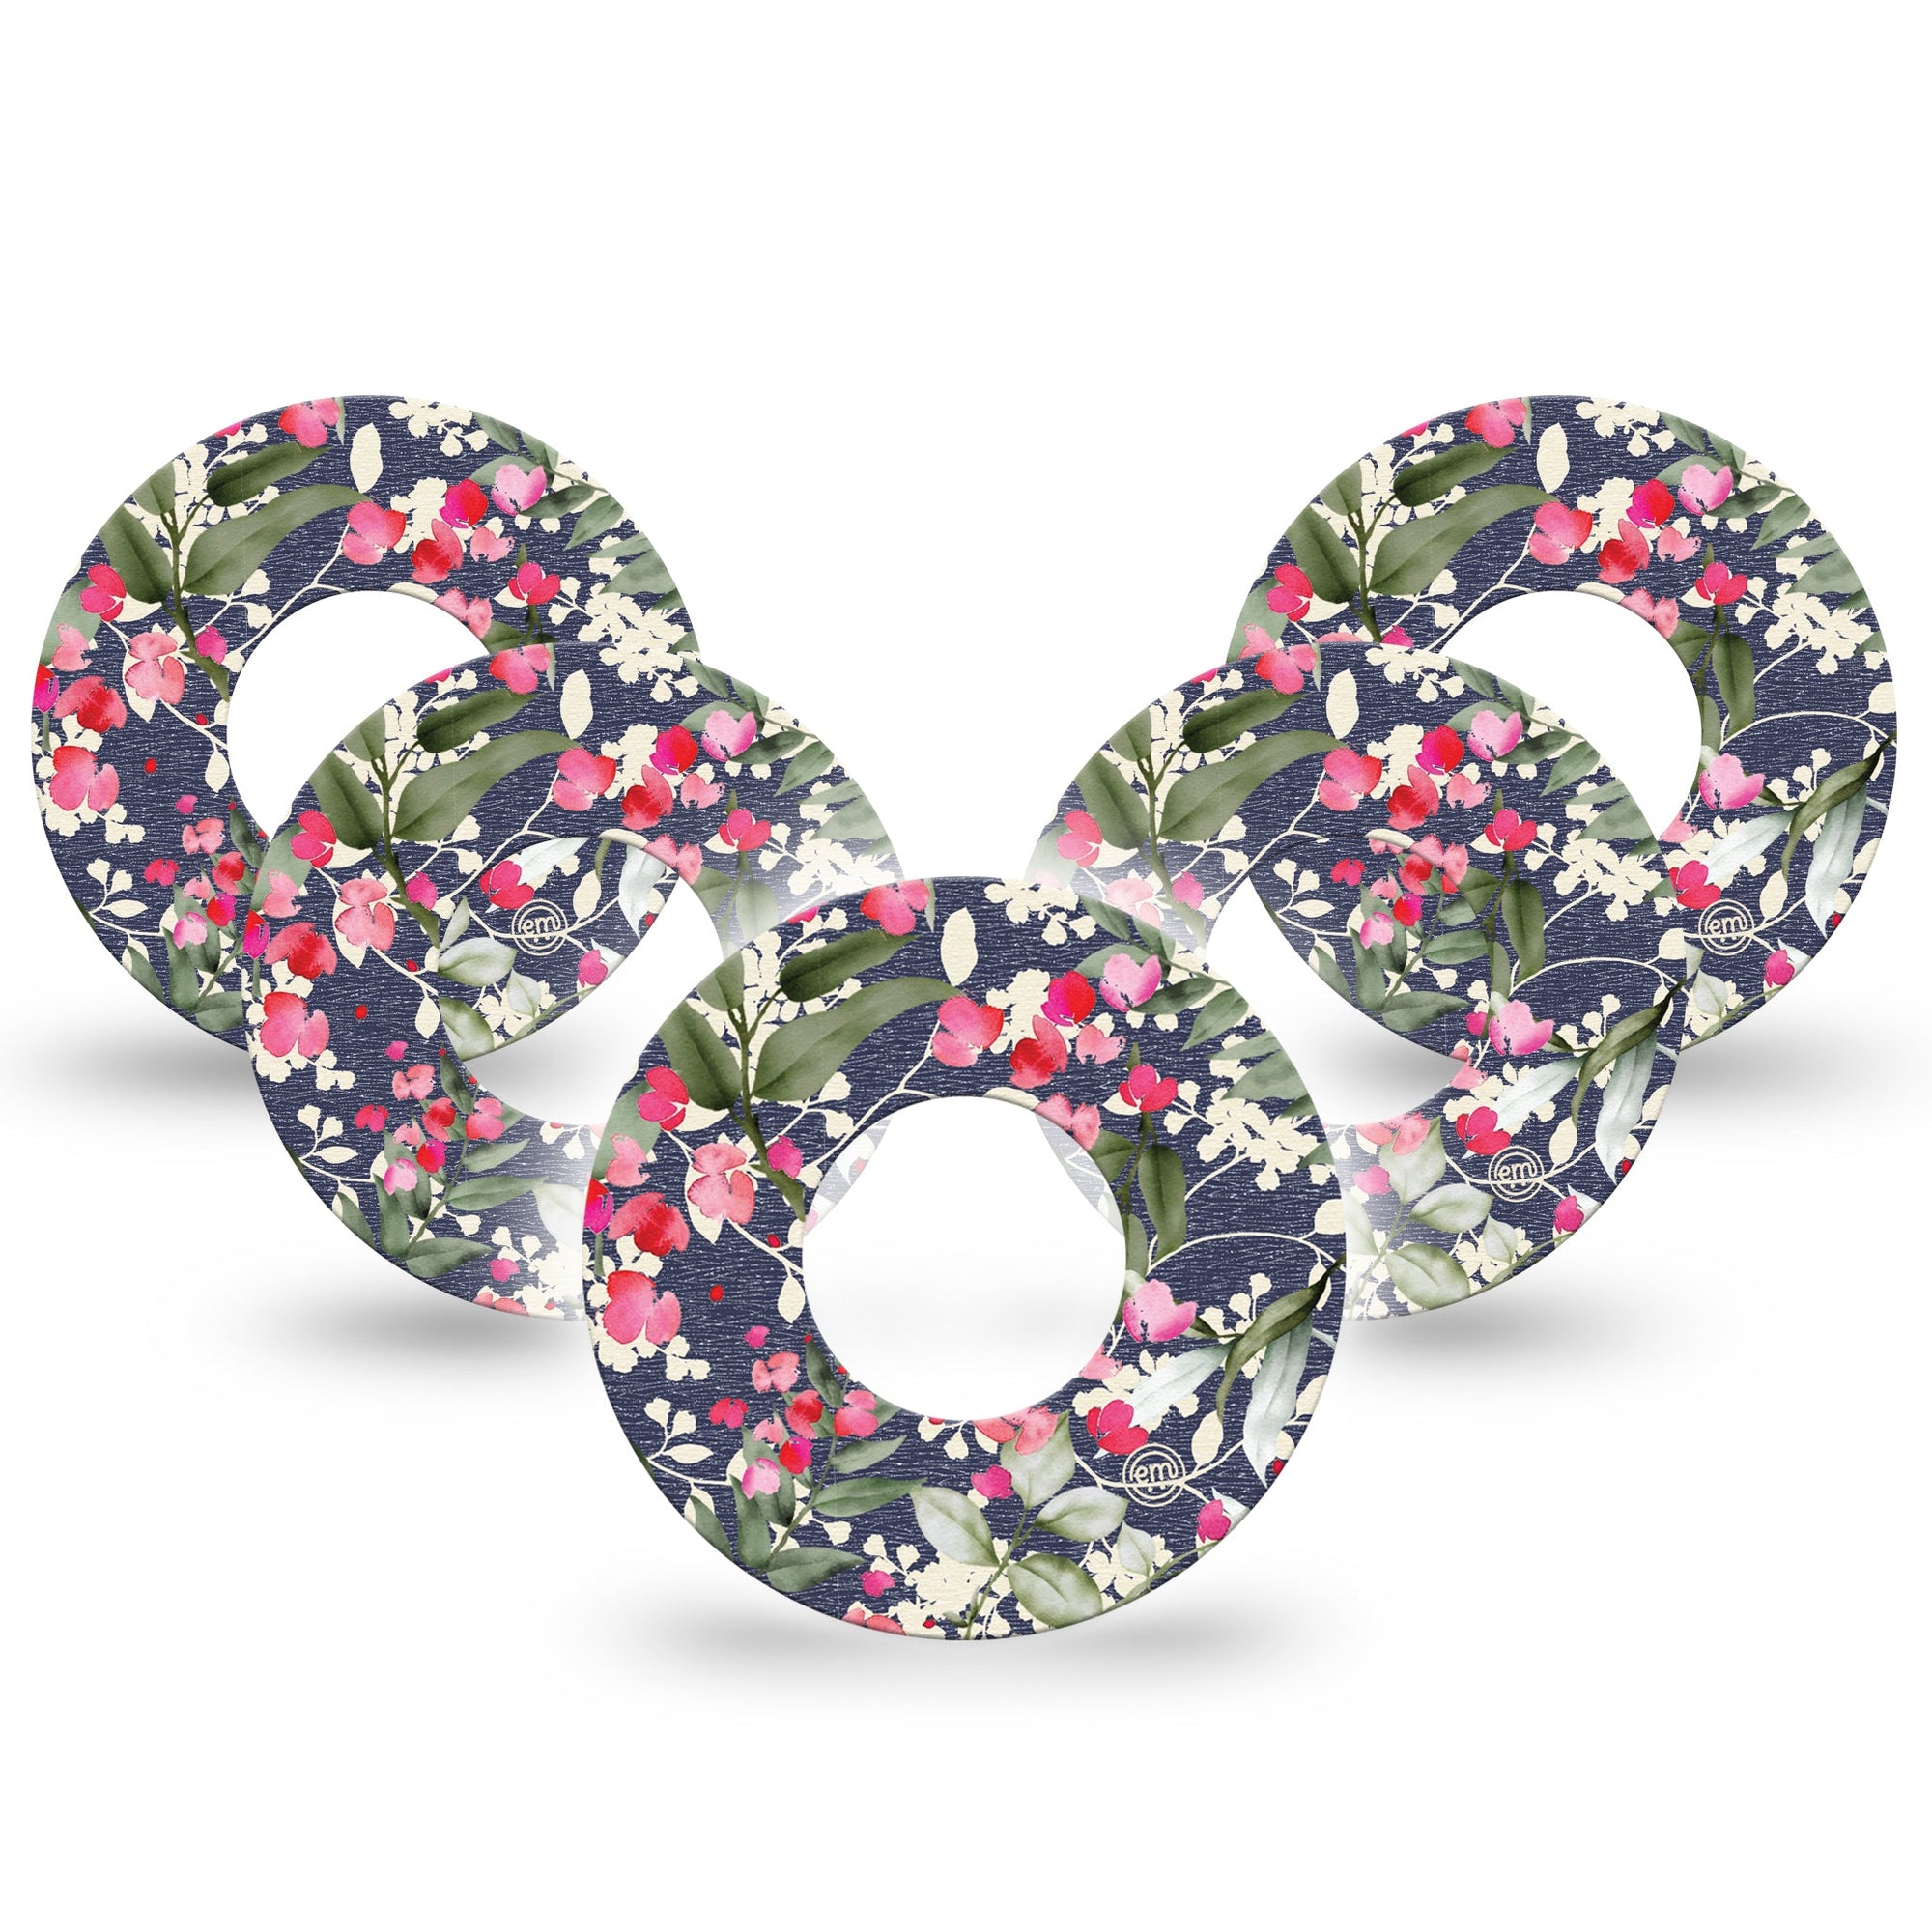 ExpressionMed Denim Flowers Libre Tape5-PackFloral Blossoms With Jeans Inspired, CGM Adhesive Patch Design